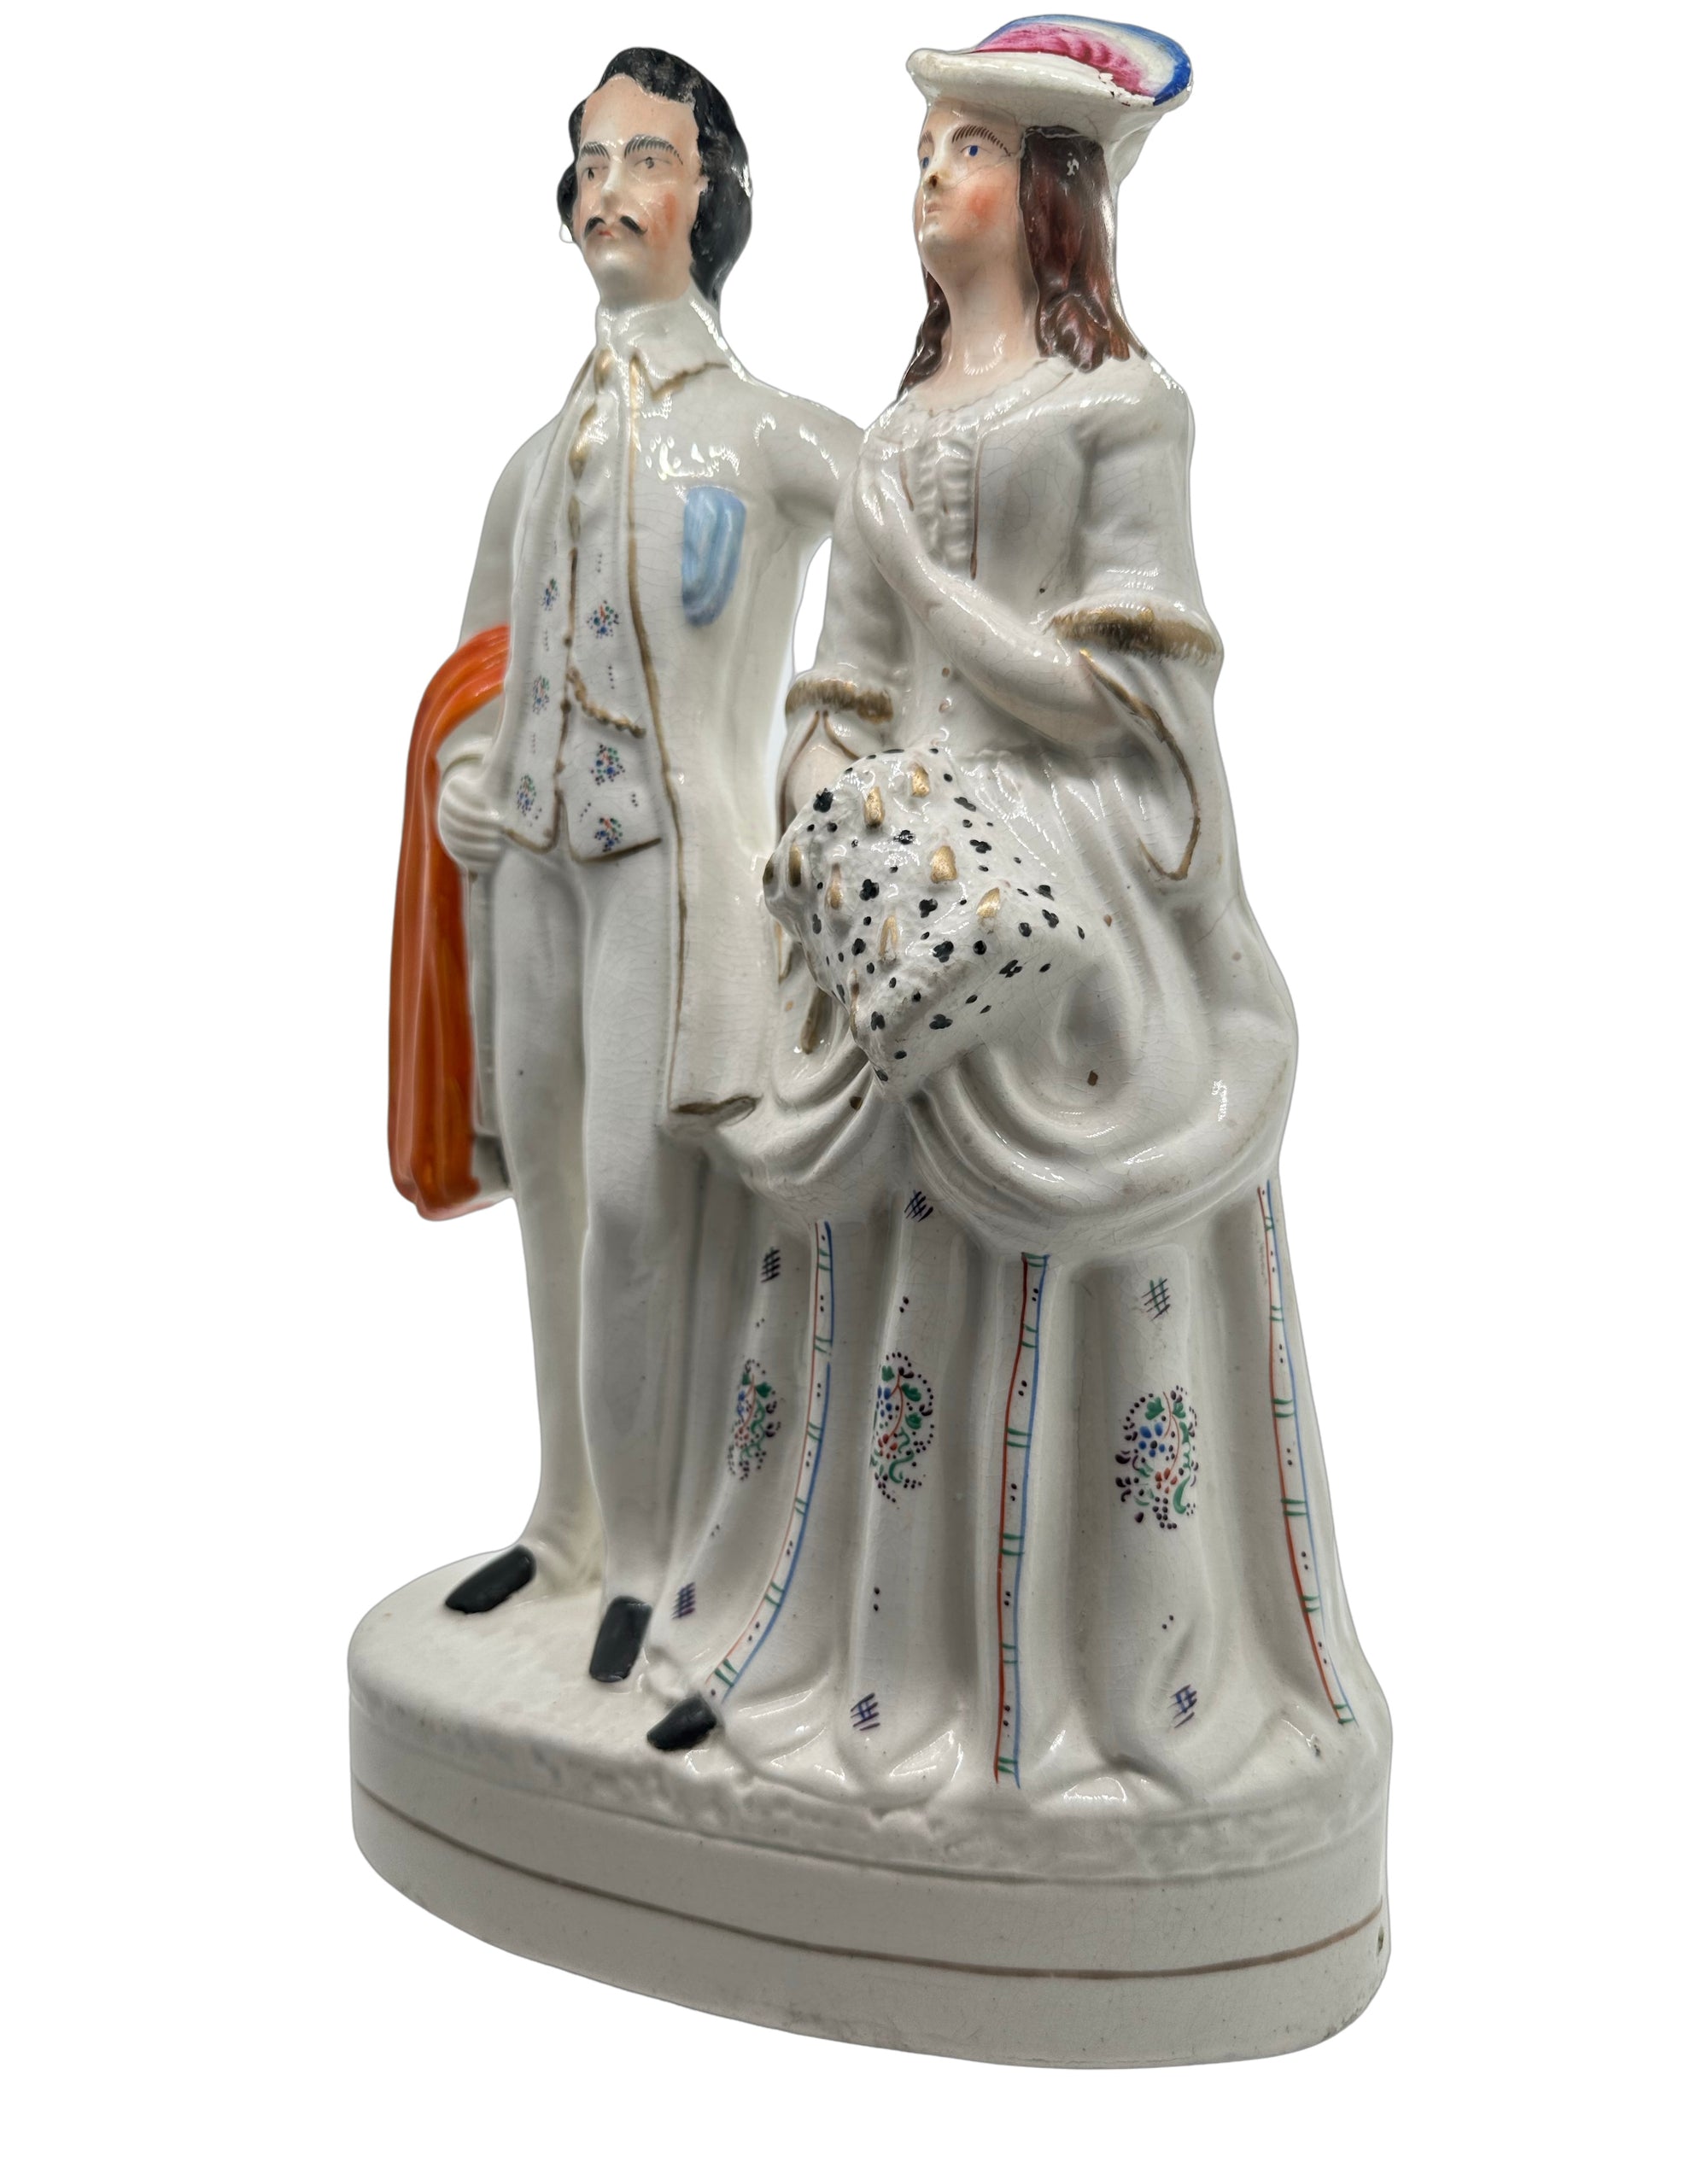 Antique Staffordshire Man and Woman